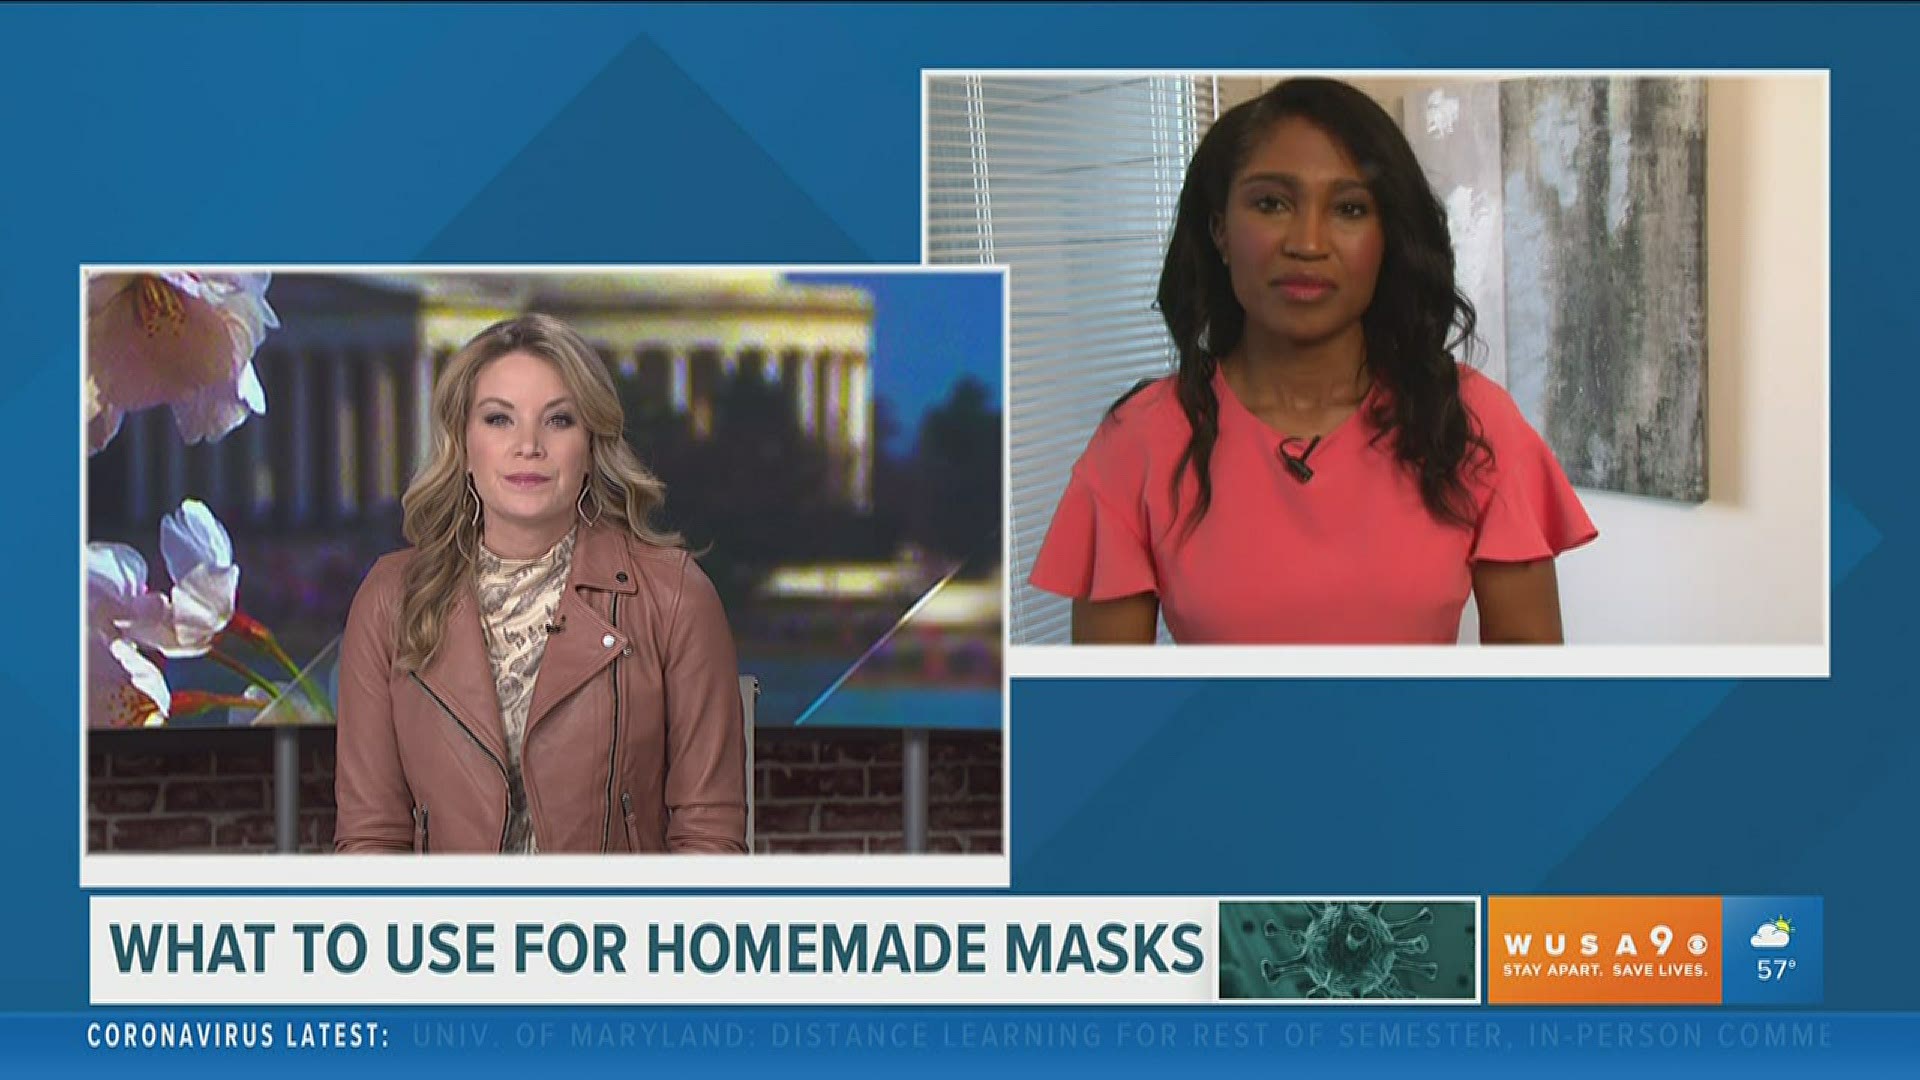 Making homemade masks have been recommendedbut how much protection do you get? Miri Marshall dug into the science of it.